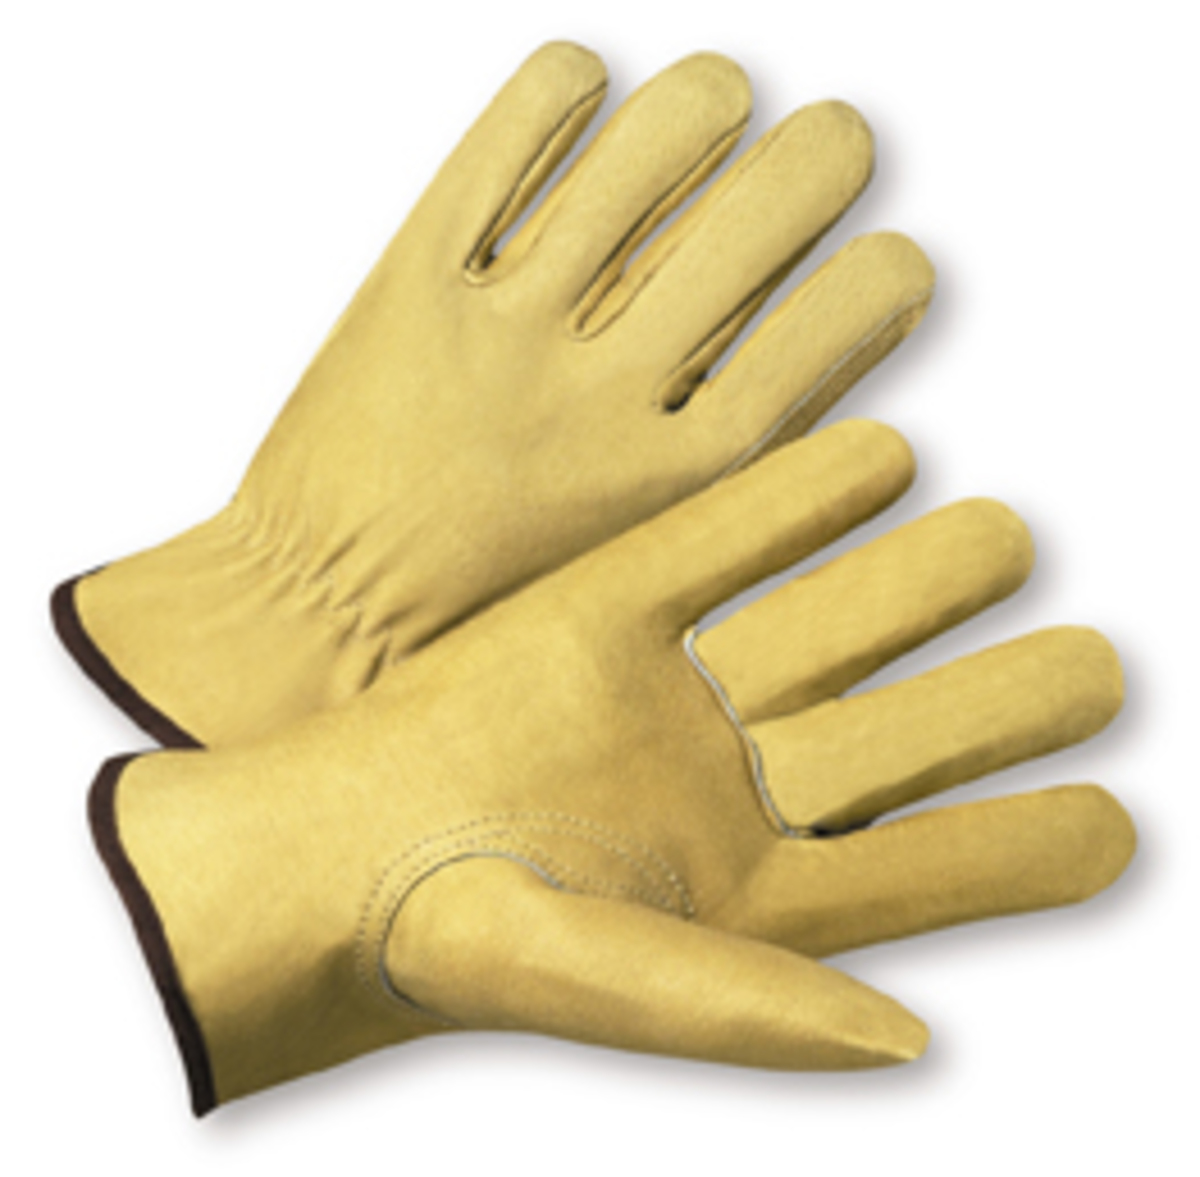 PIP® 2X Natural Pigskin Fleece Lined Cold Weather Gloves